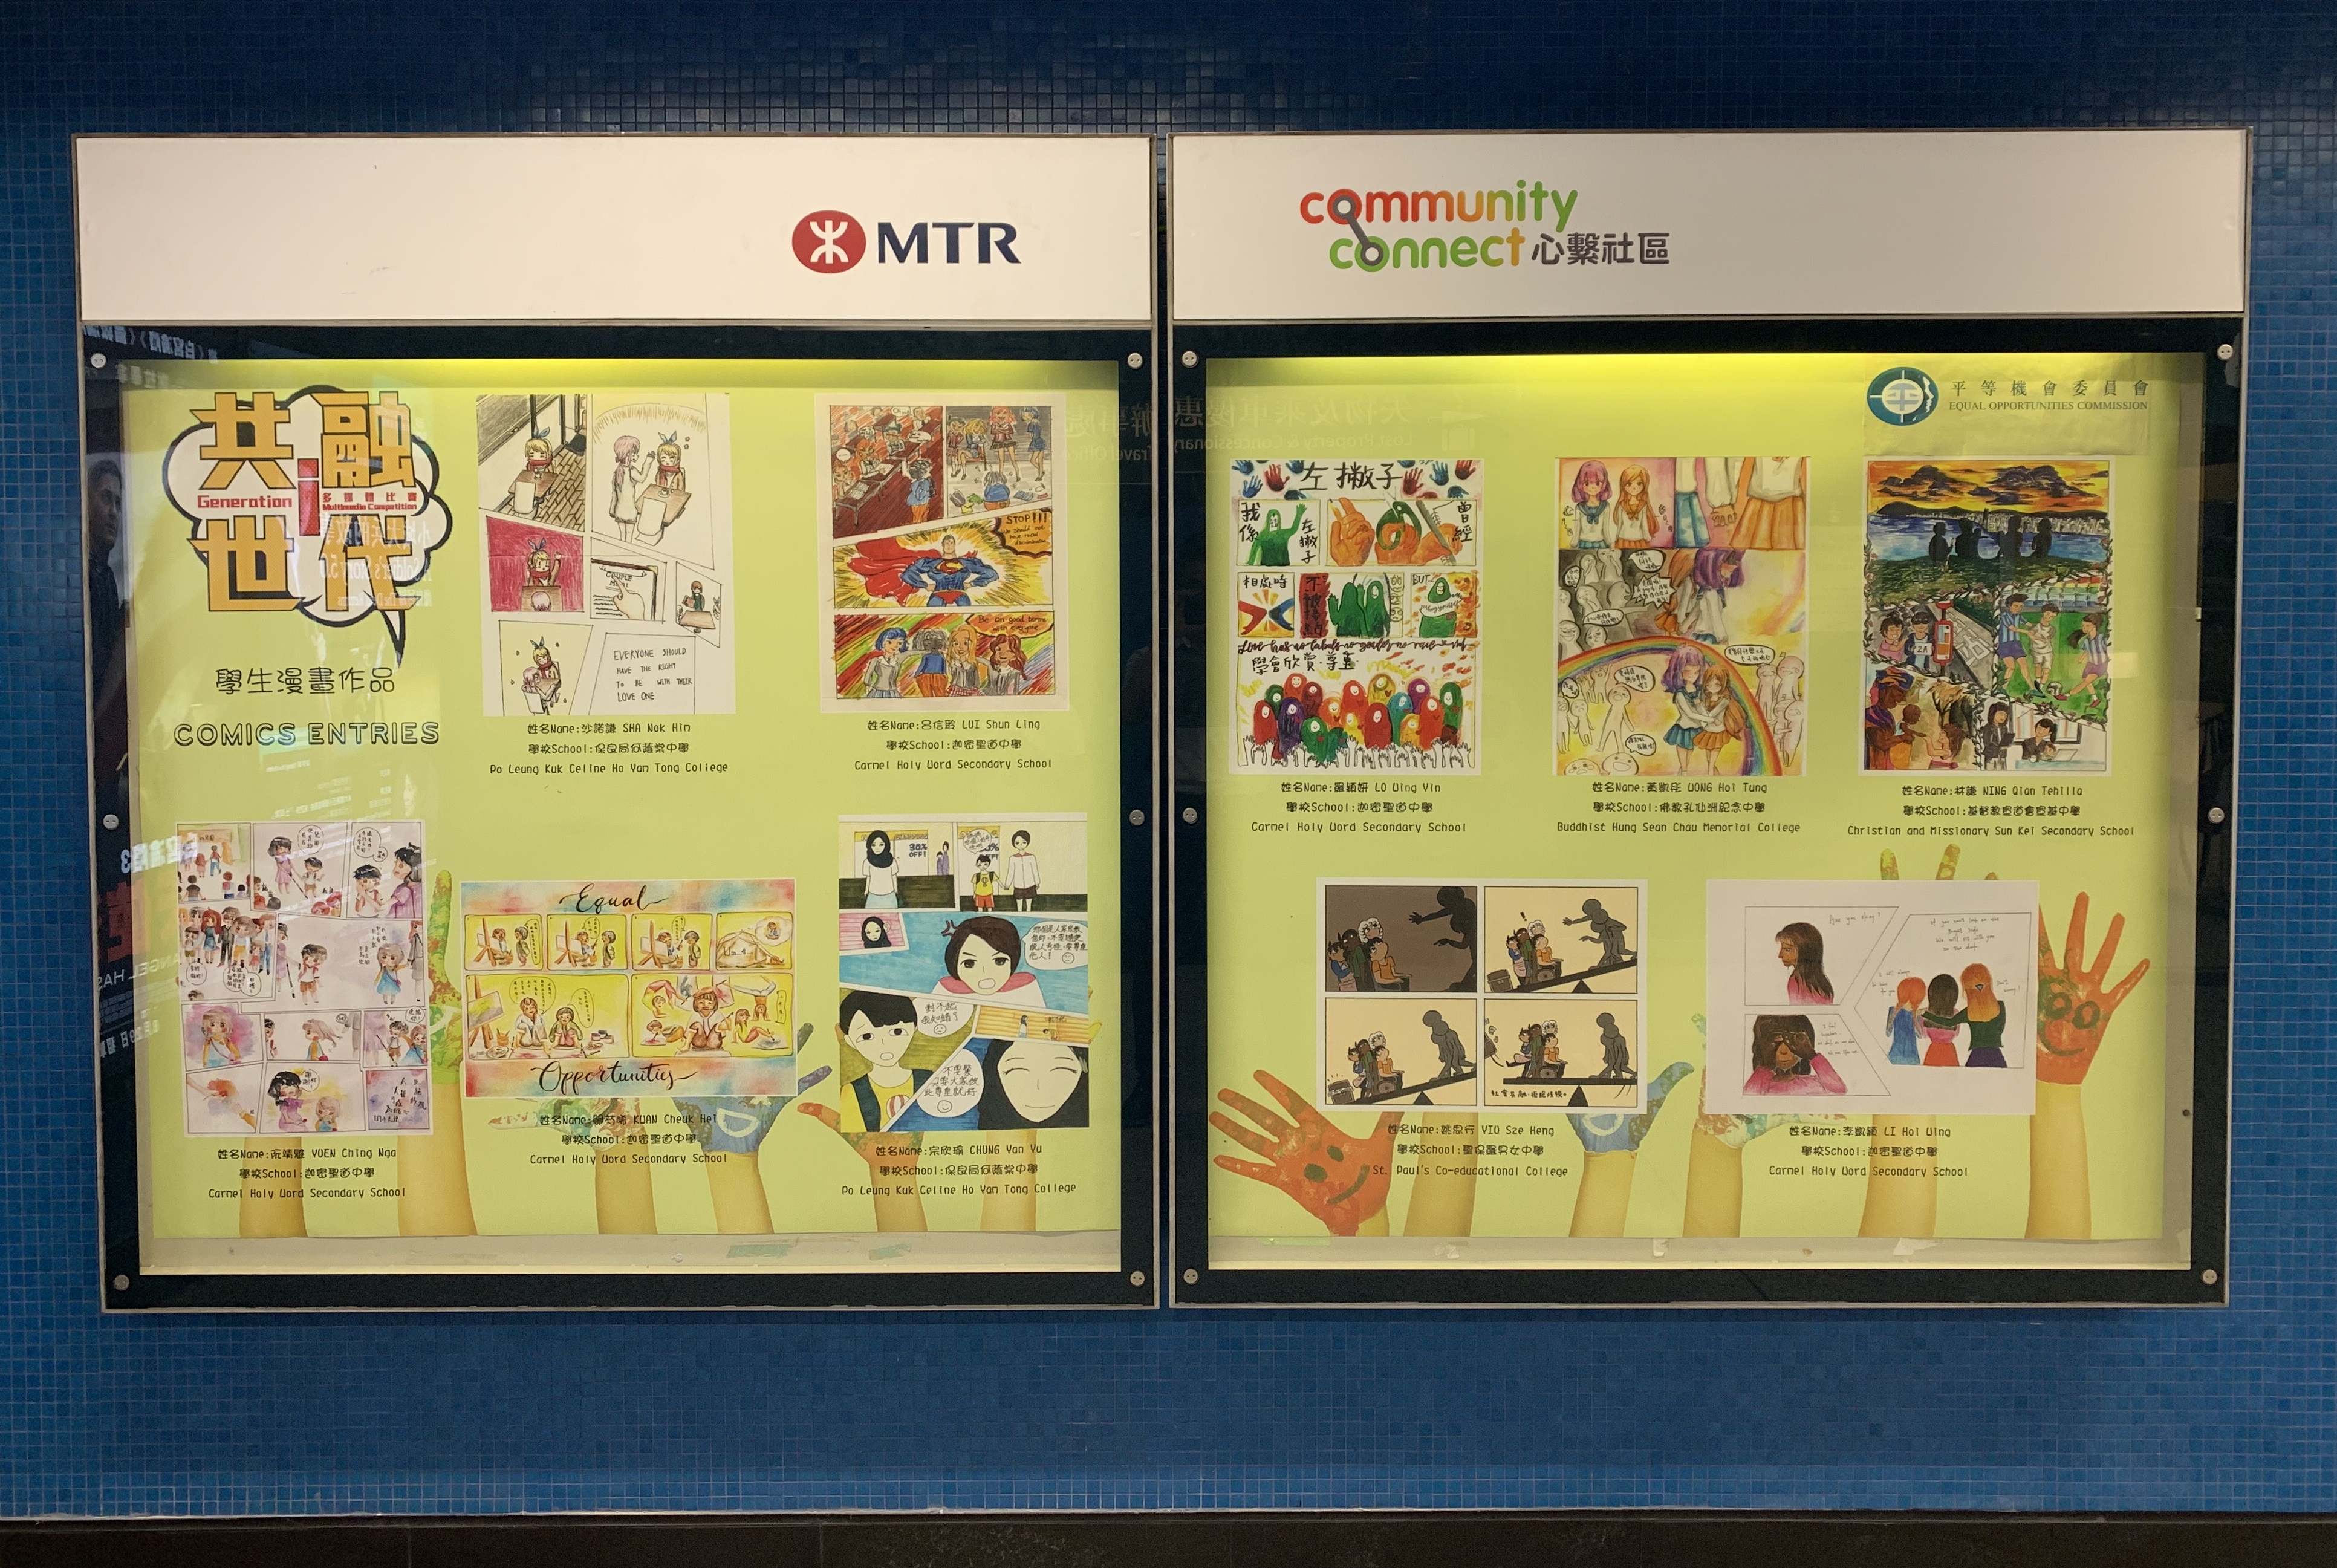 Photo of the exhibition board at Admiralty MTR station